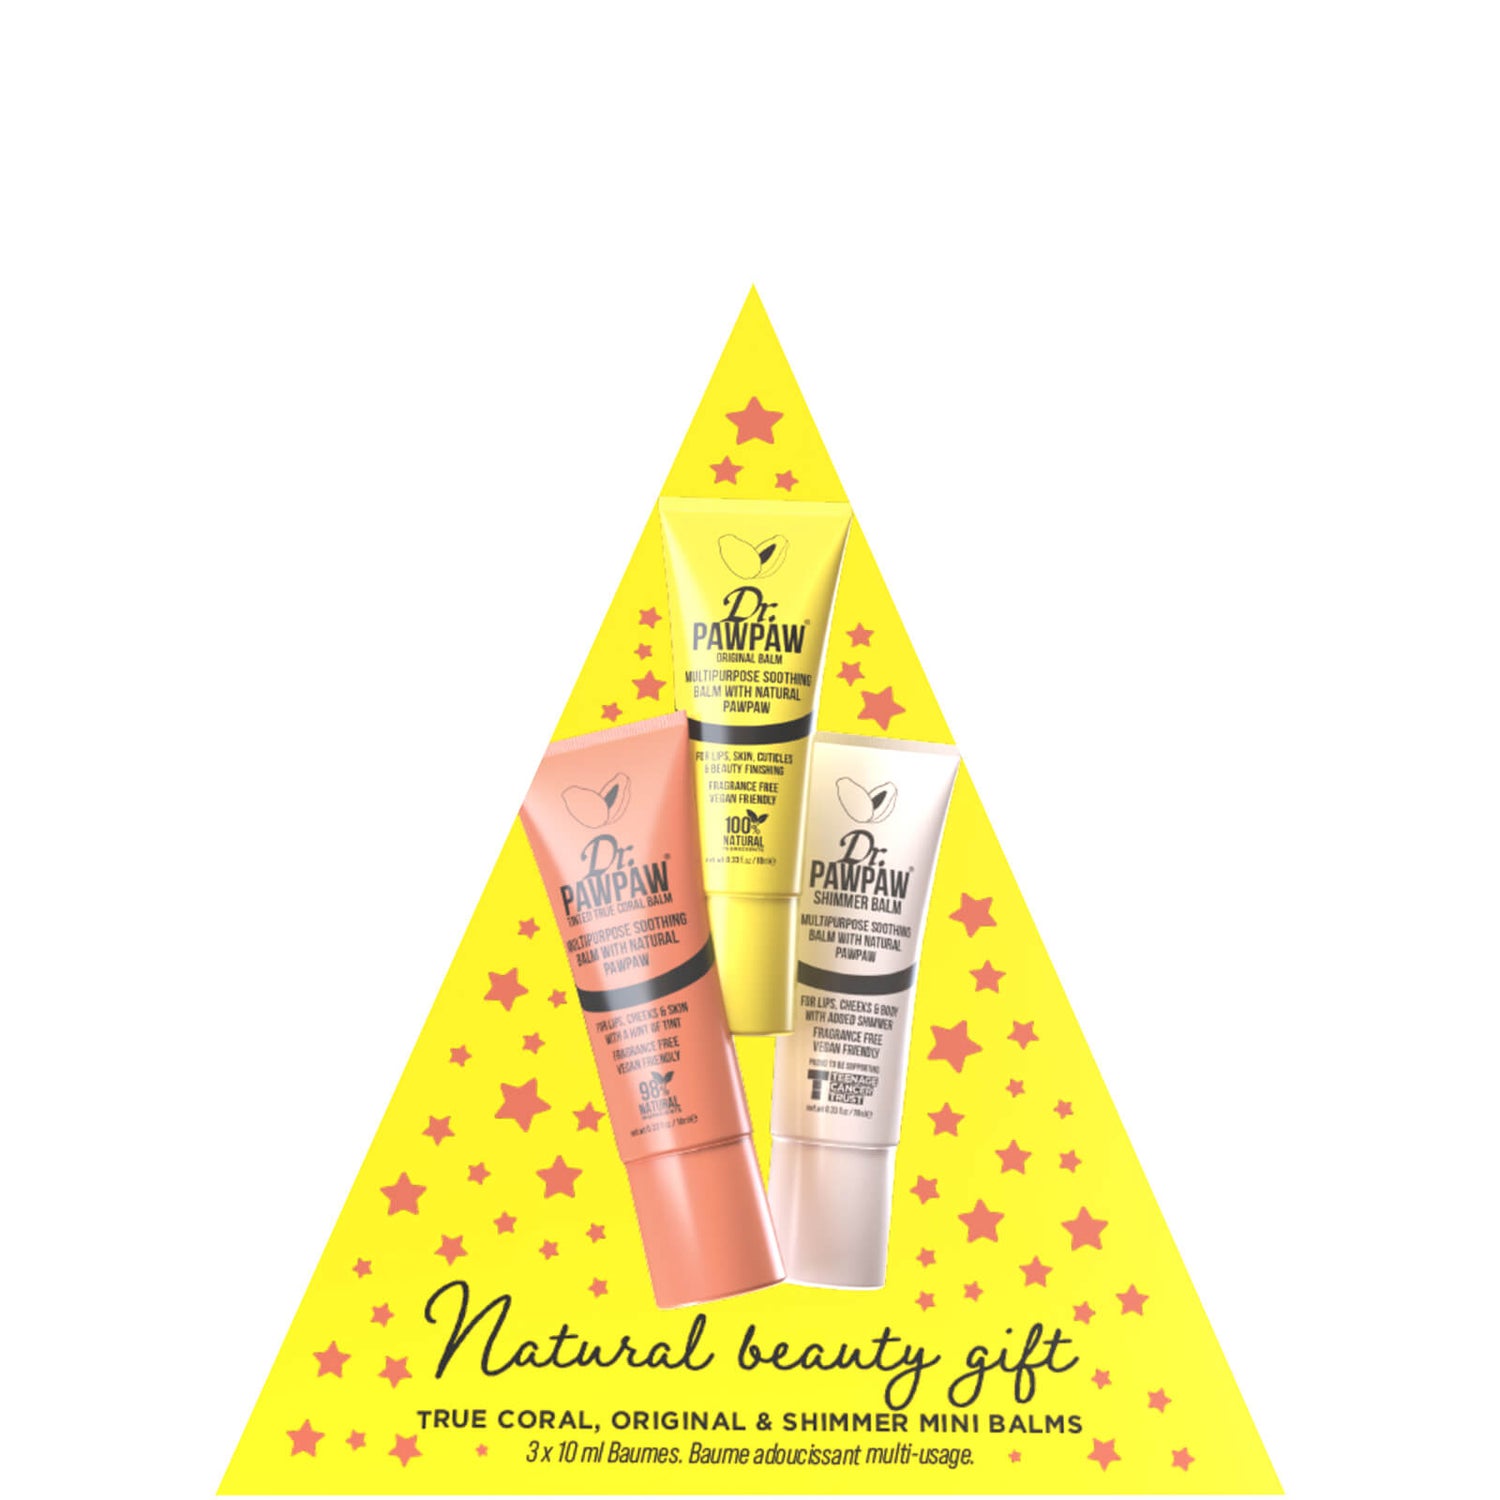 Dr. PAWPAW Natural Beauty Gift Set (Worth £12.75)